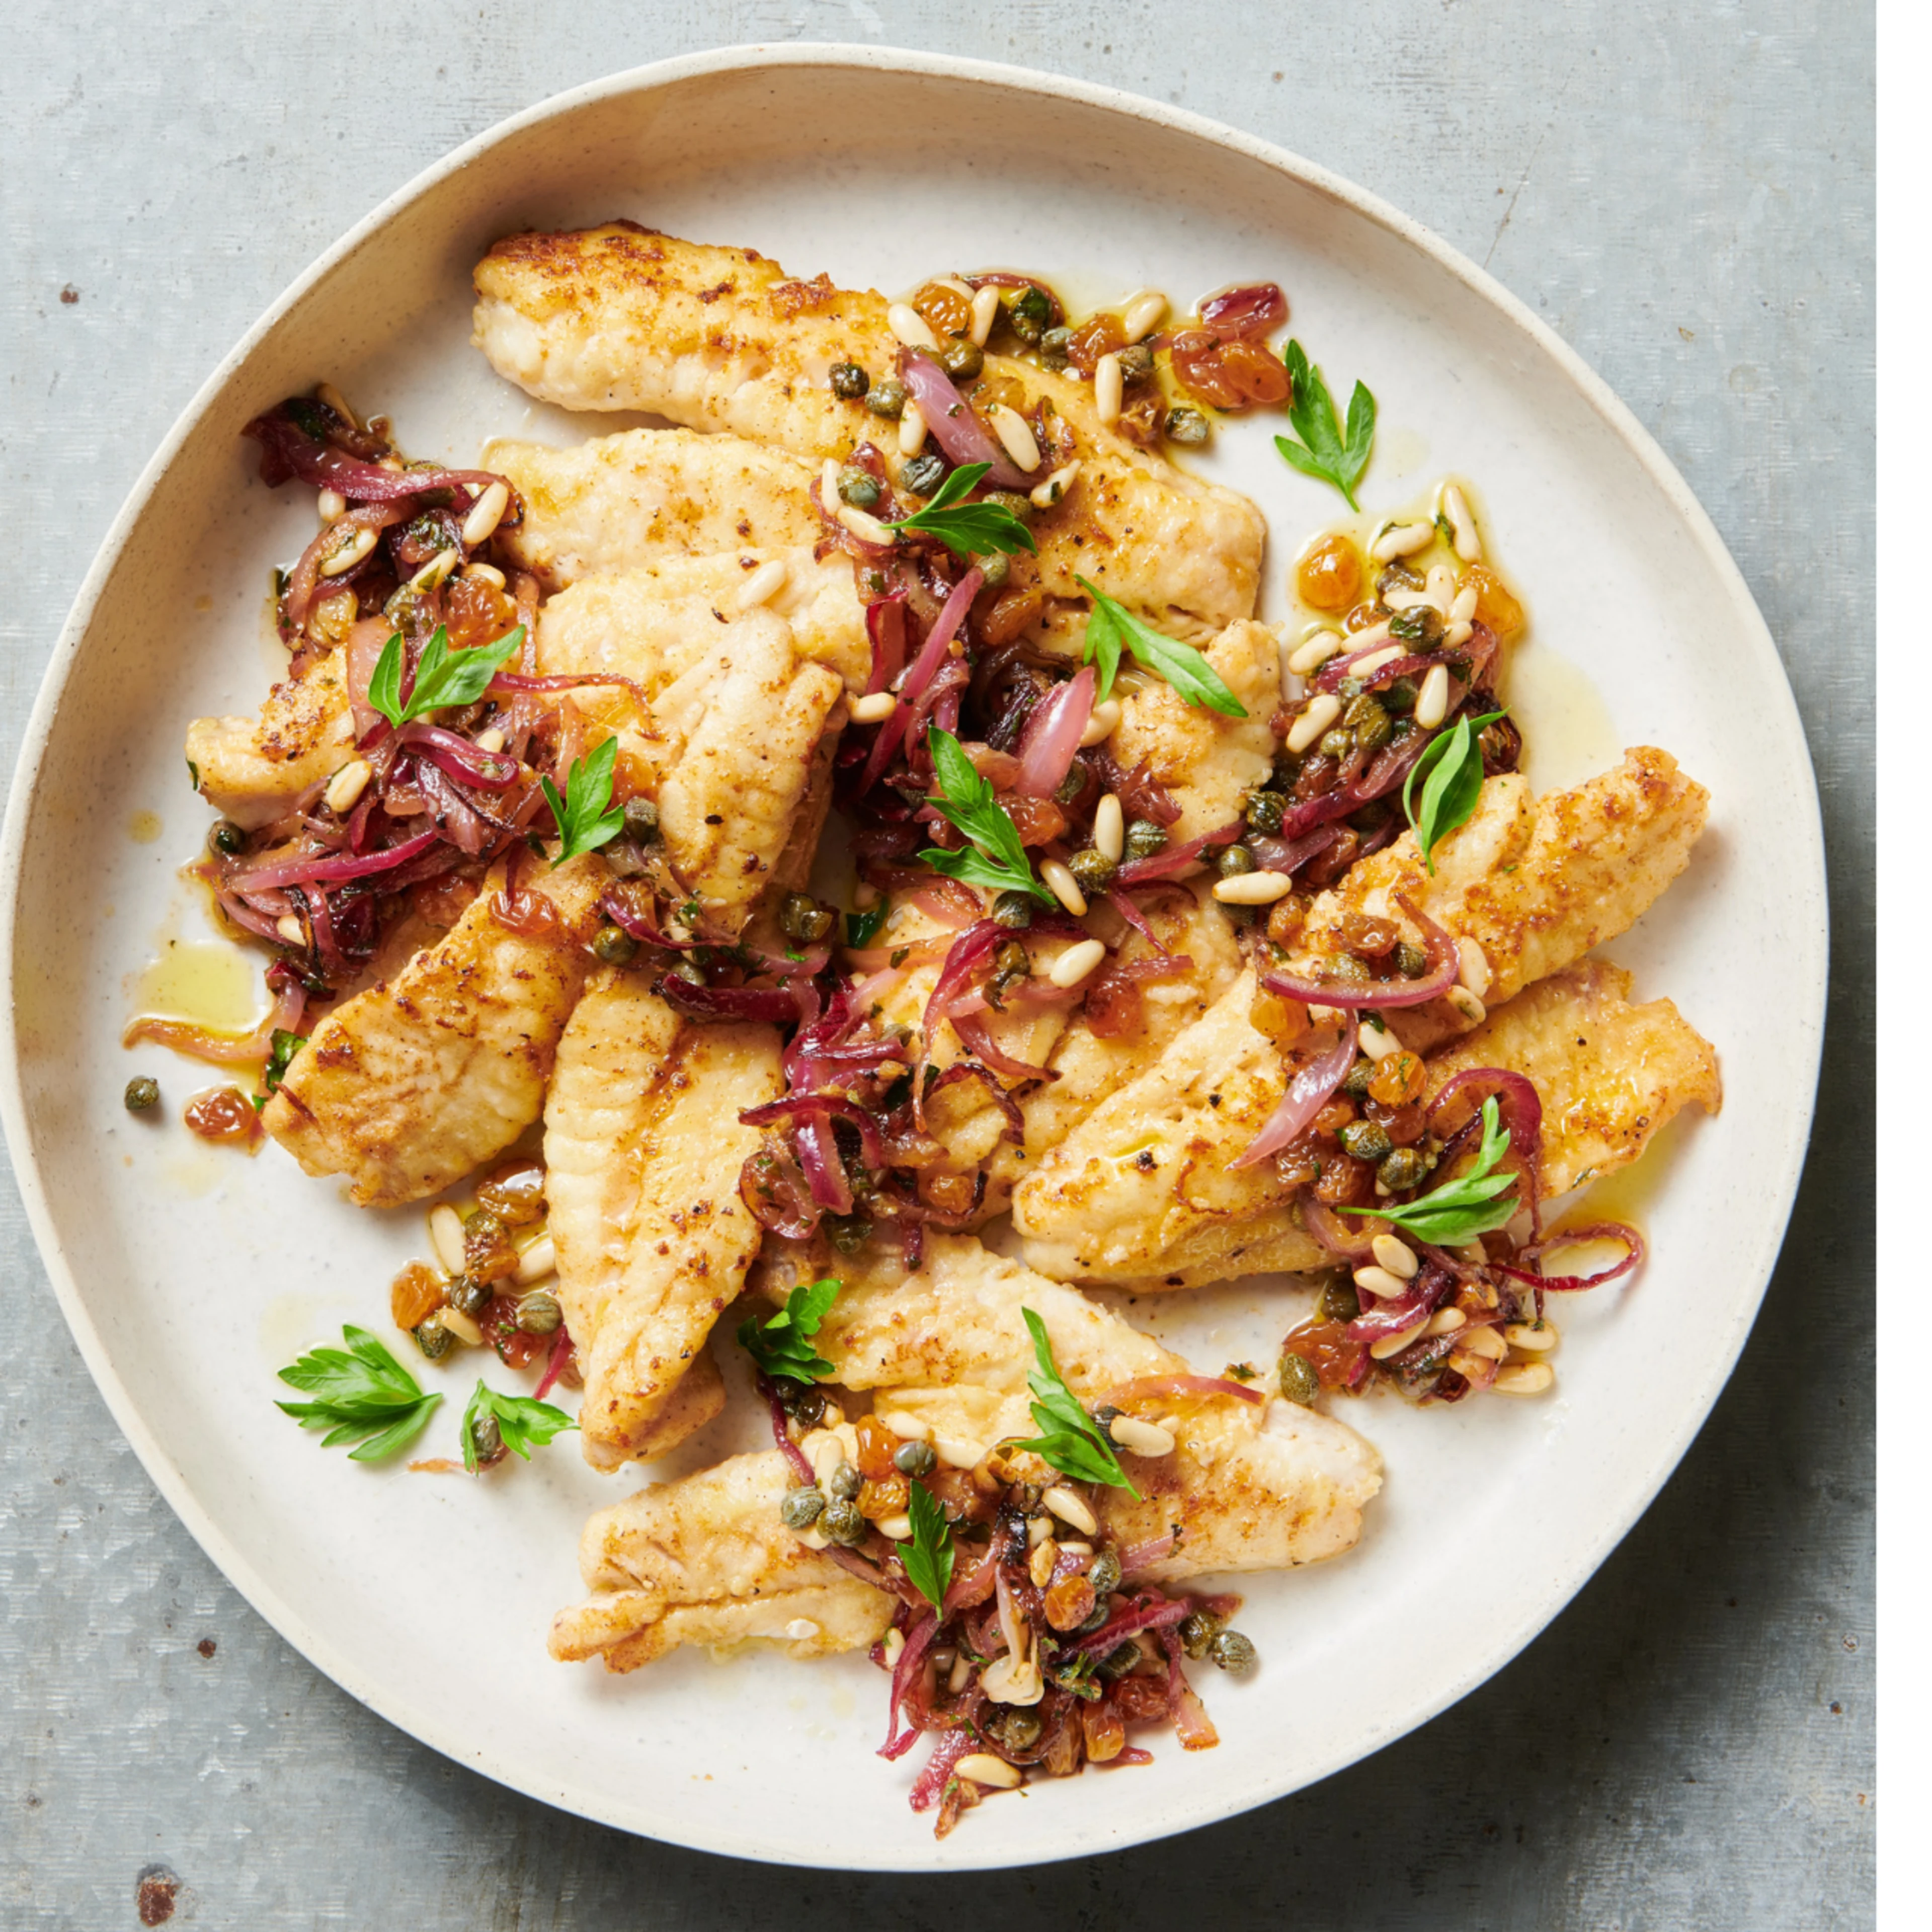 Our delicious Pan-fried Sicilian Fish recipe uses gurnard fish, sultanas, capers and pinenuts. Pan fry or cook in the oven.